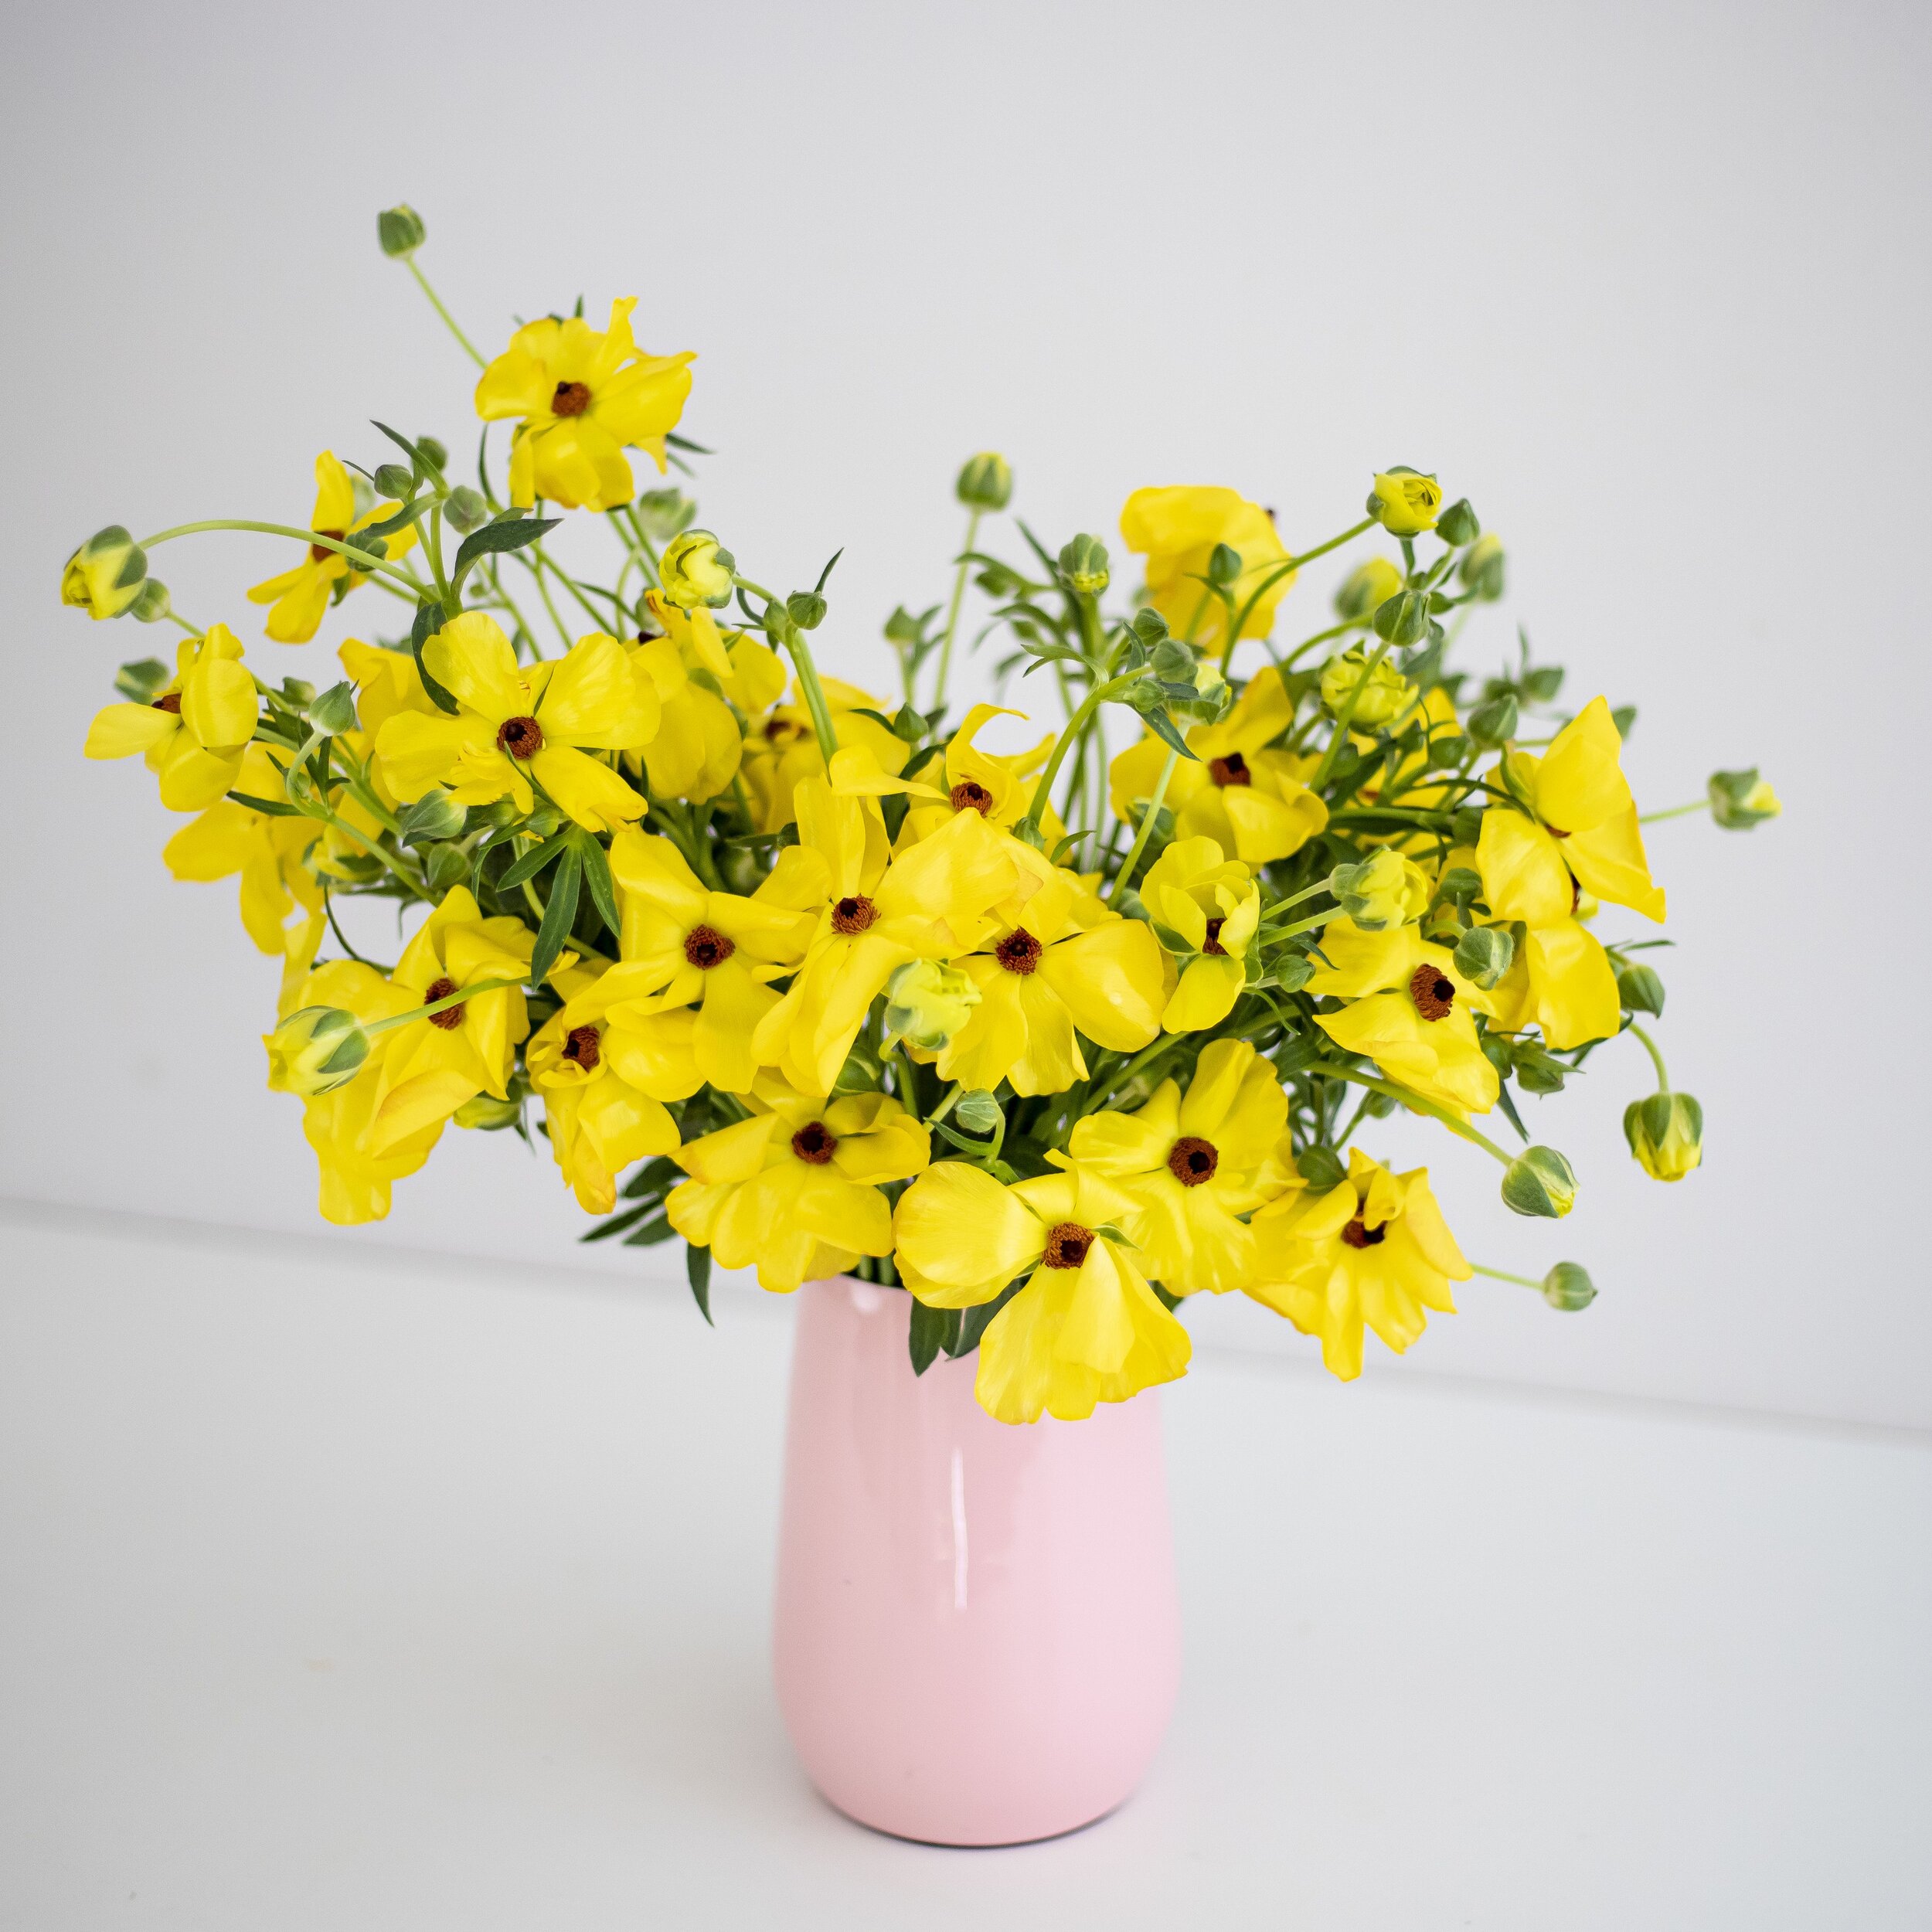 An arrangement of yellow Butterfly Ranunculus in a light pink vase on a white table top